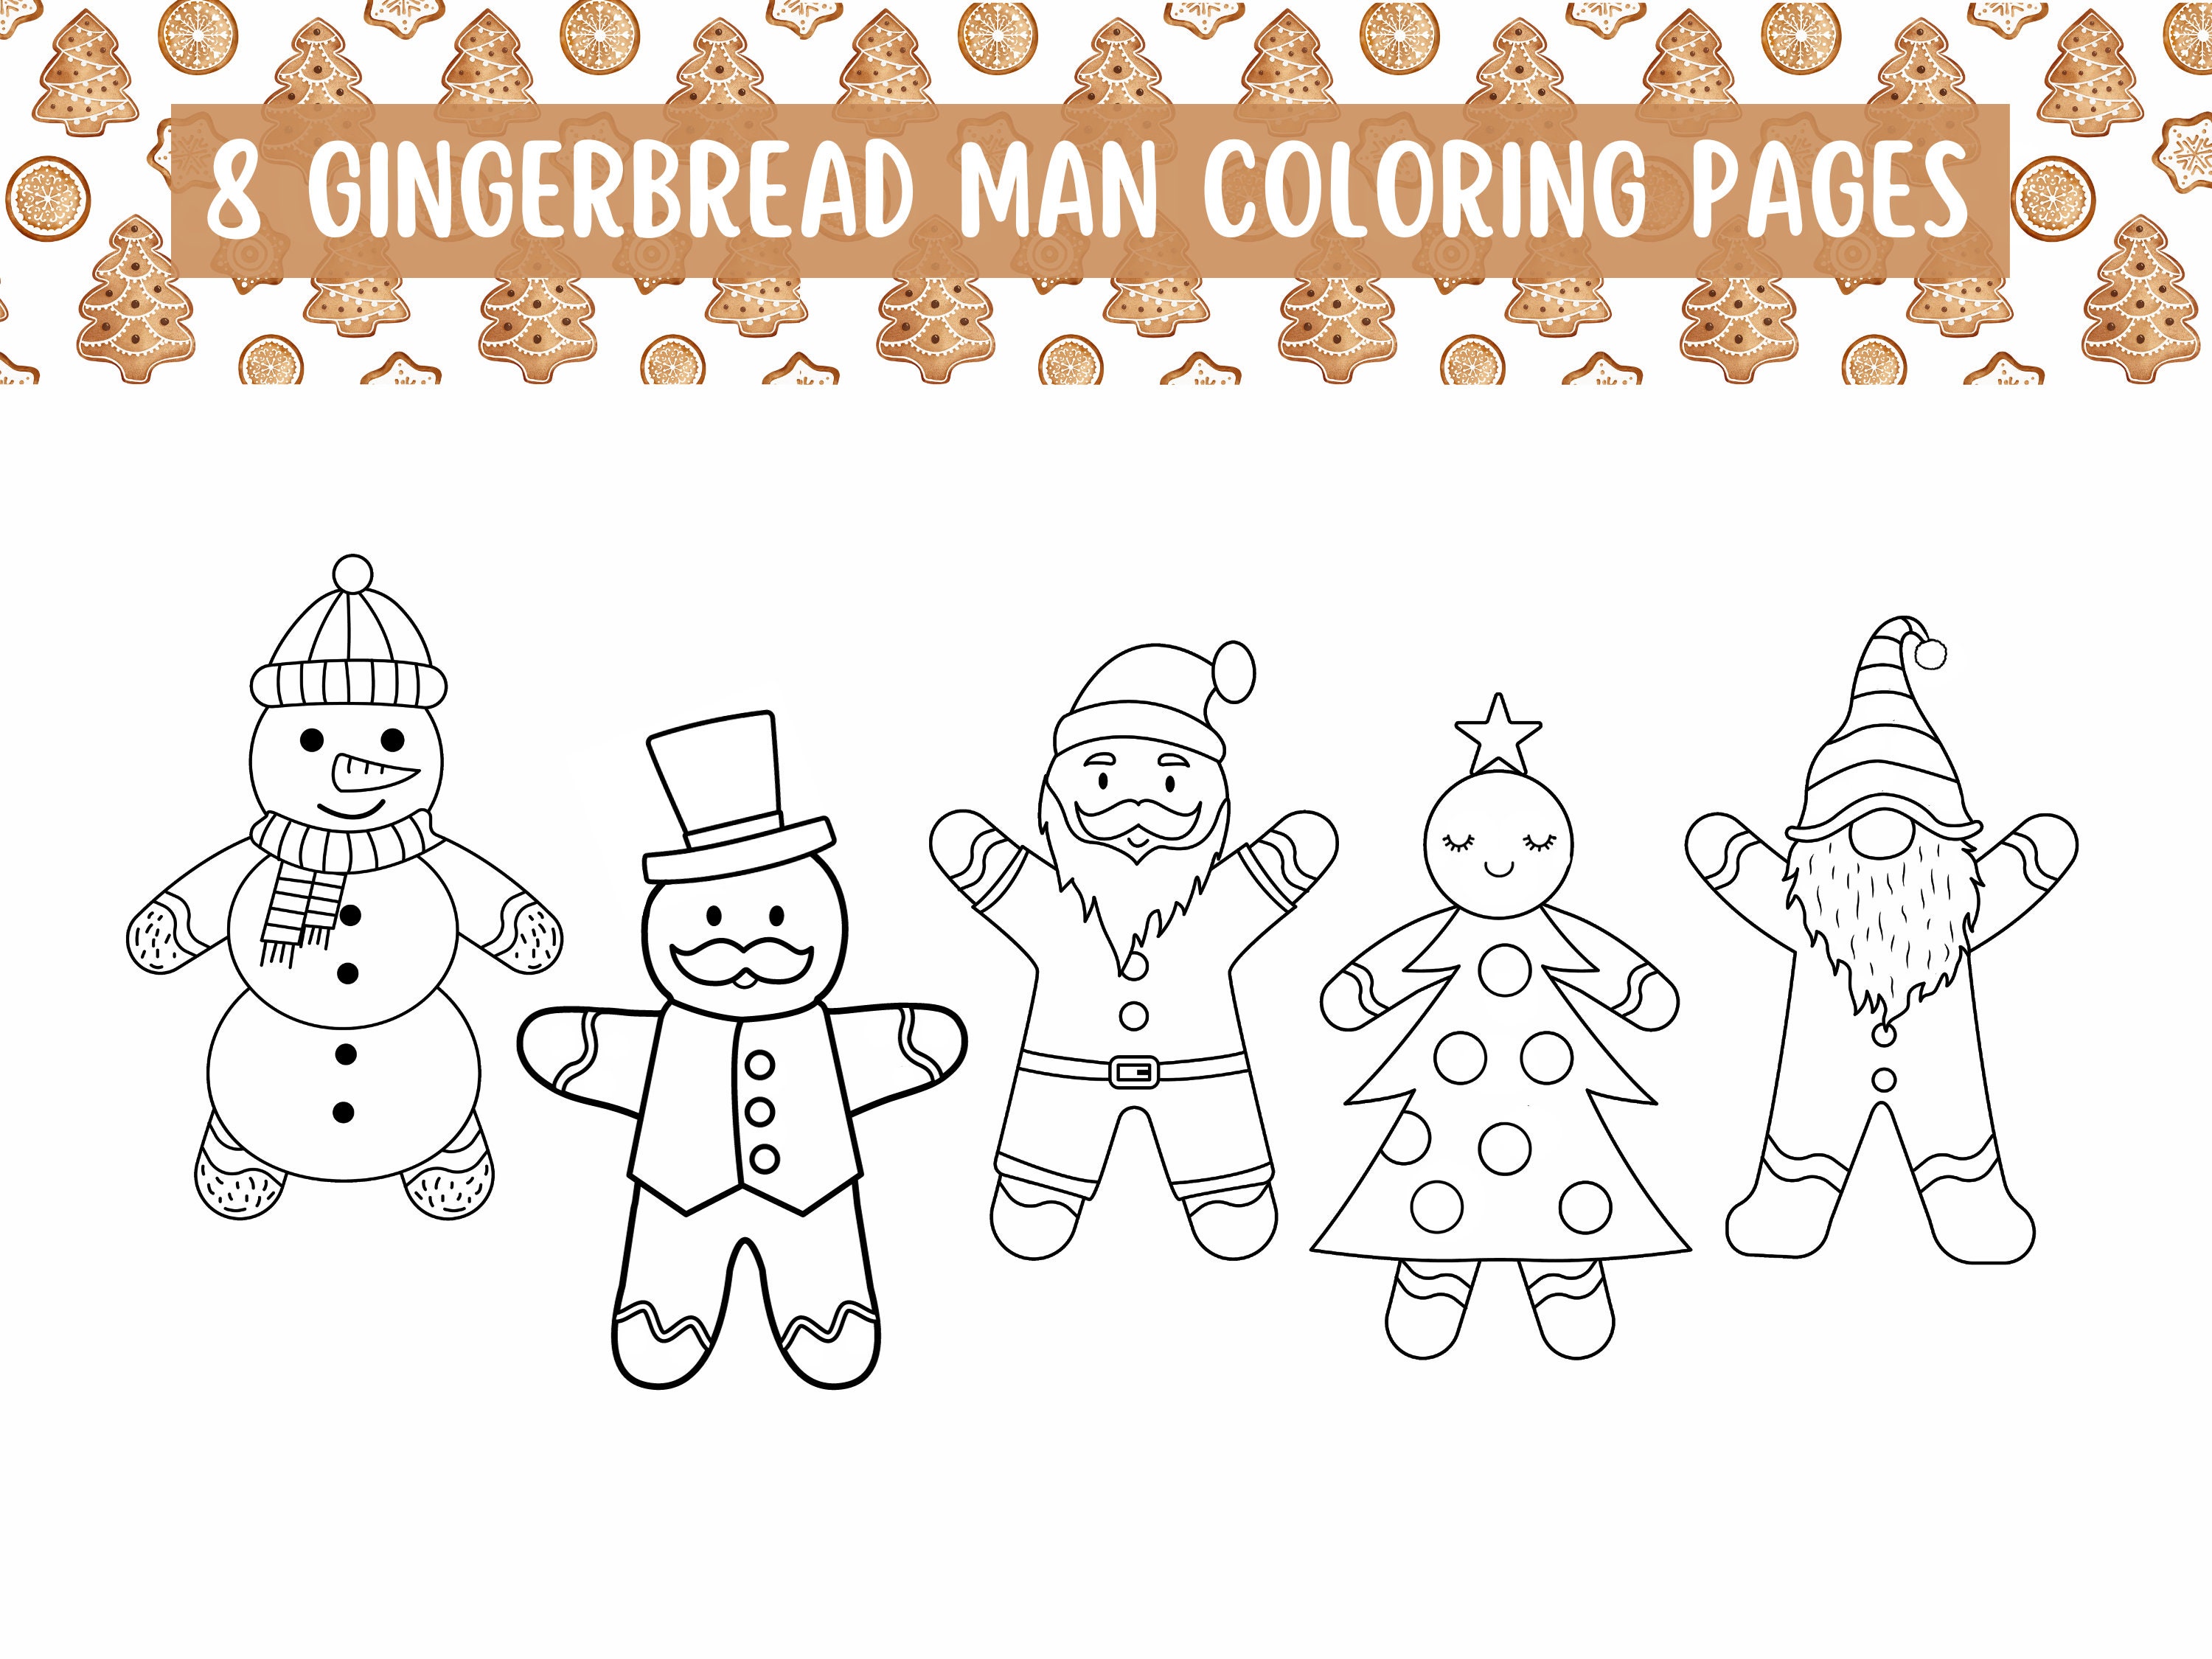 Gingerbread man coloring pages cute colouring sheets printable color pages kids coloring sheets easy coloring pages instant download